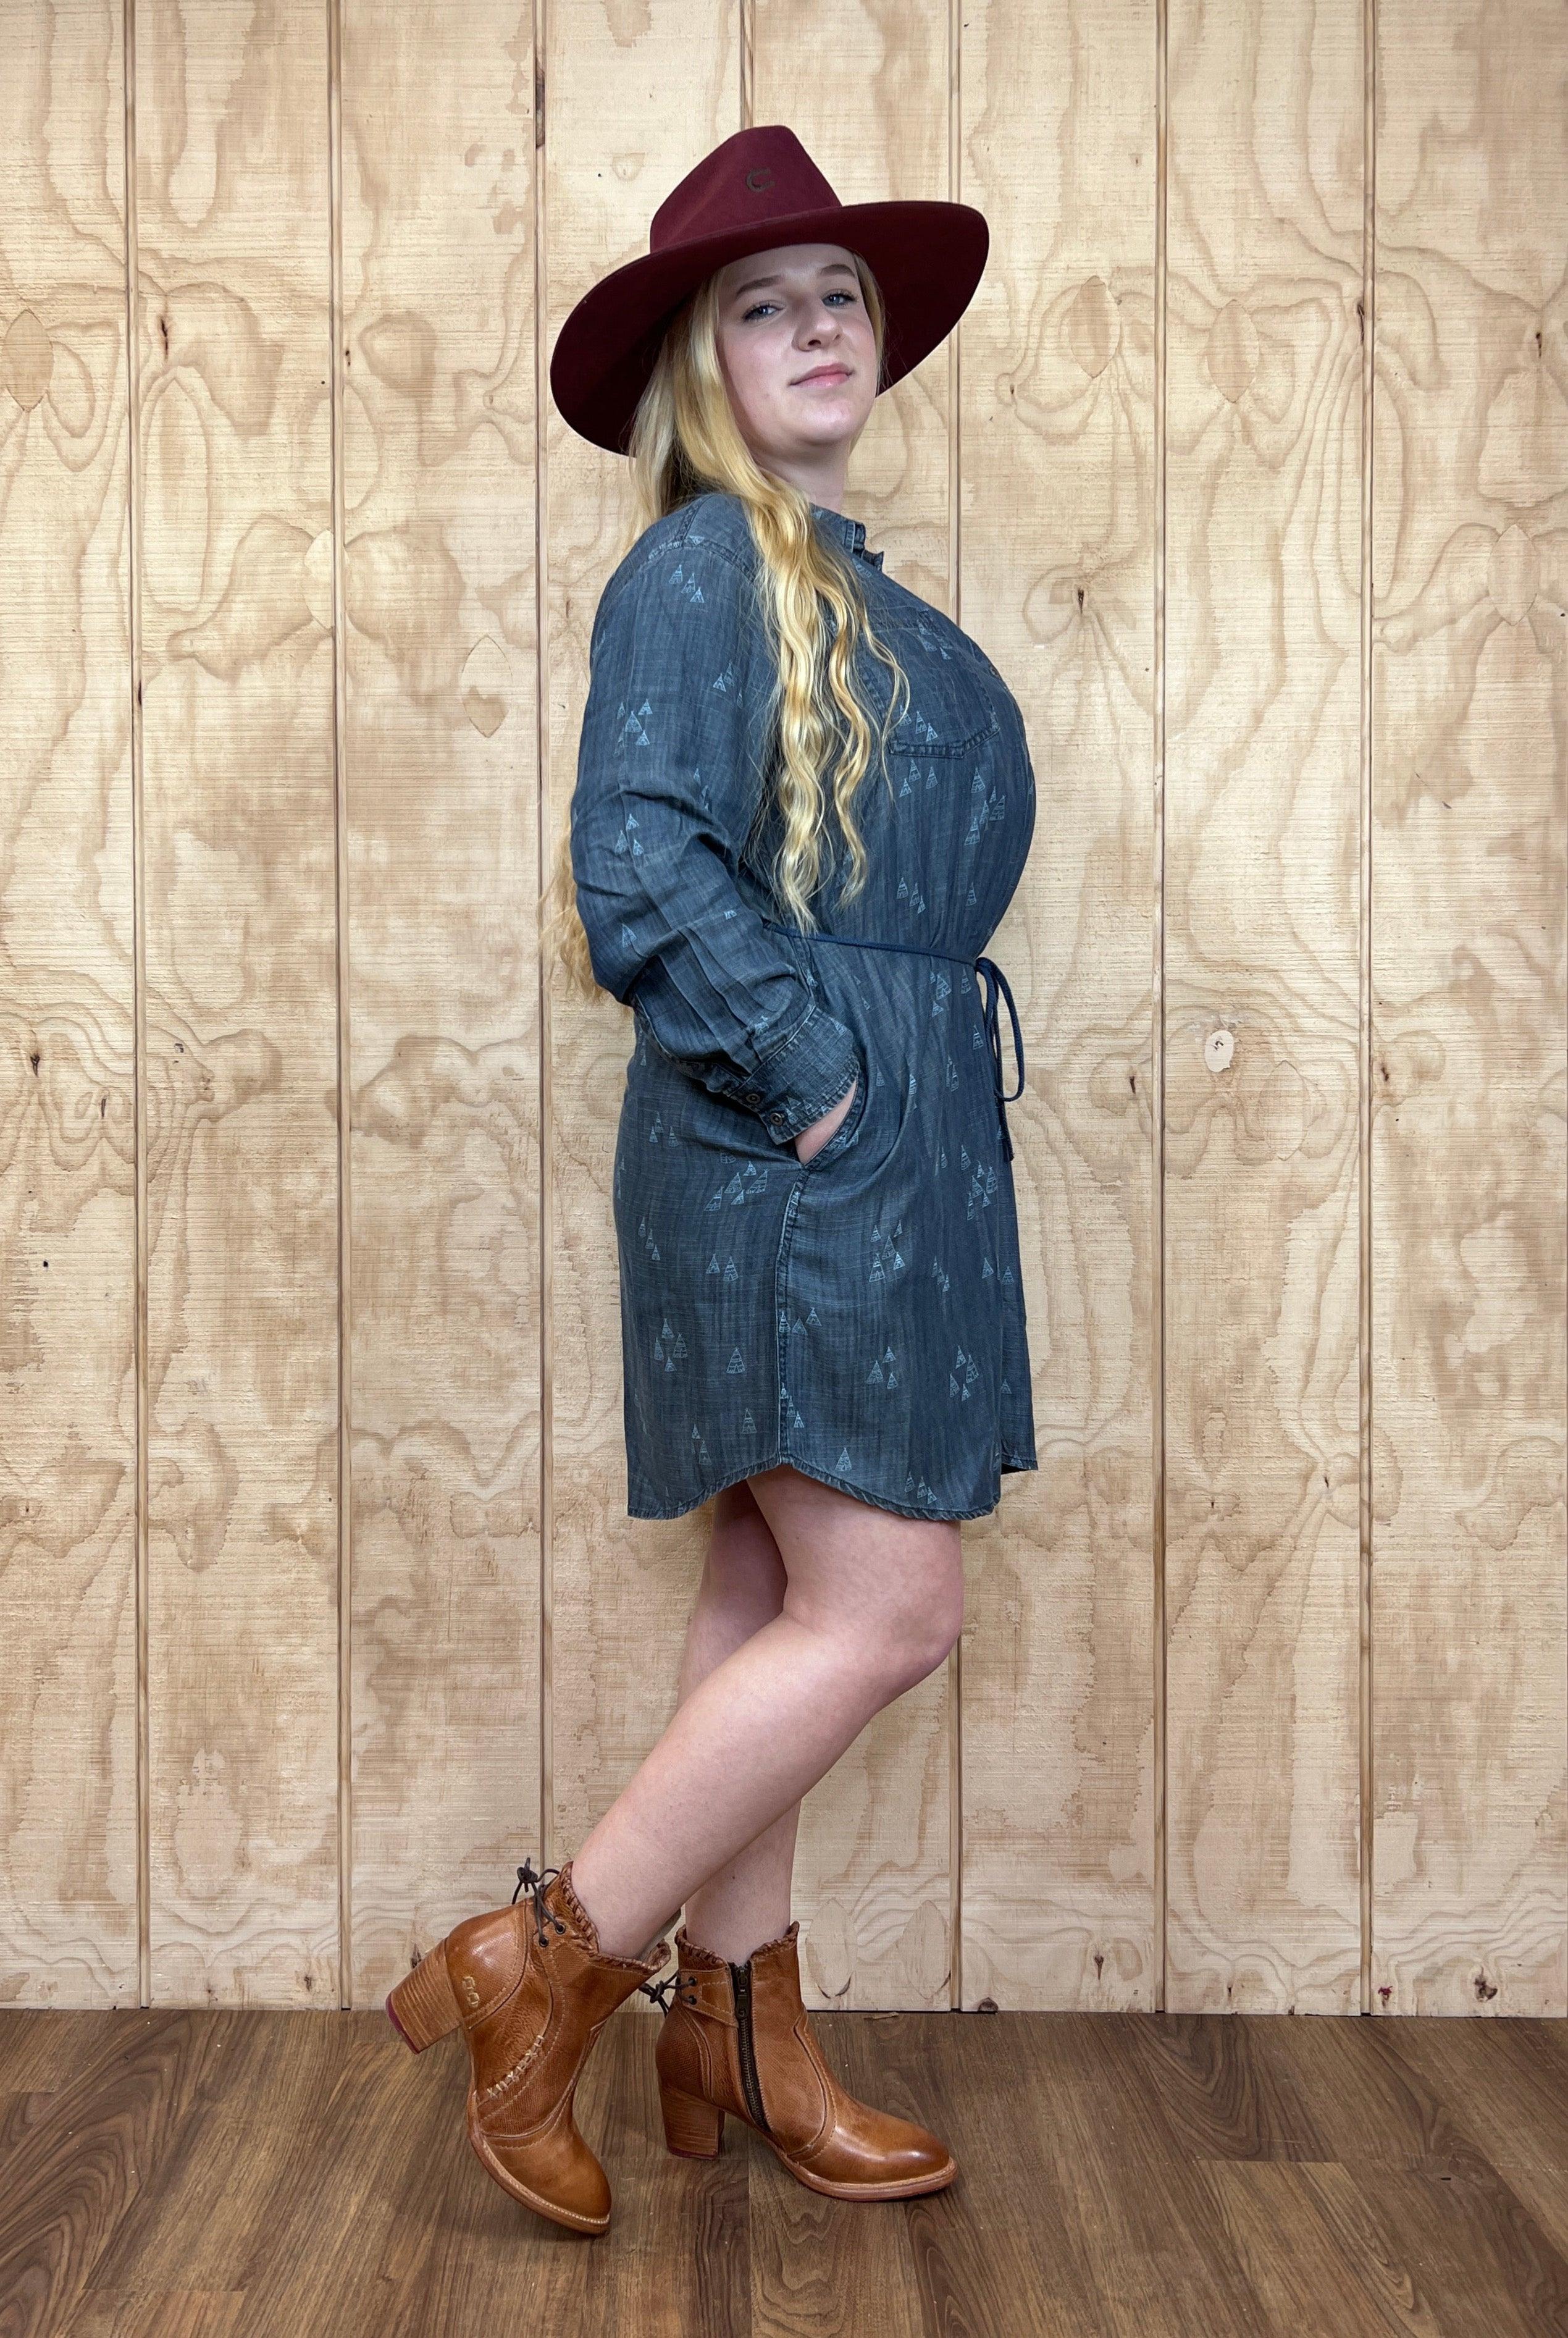 Modern Cowgirl Style with Denim Dress & Brown Boots